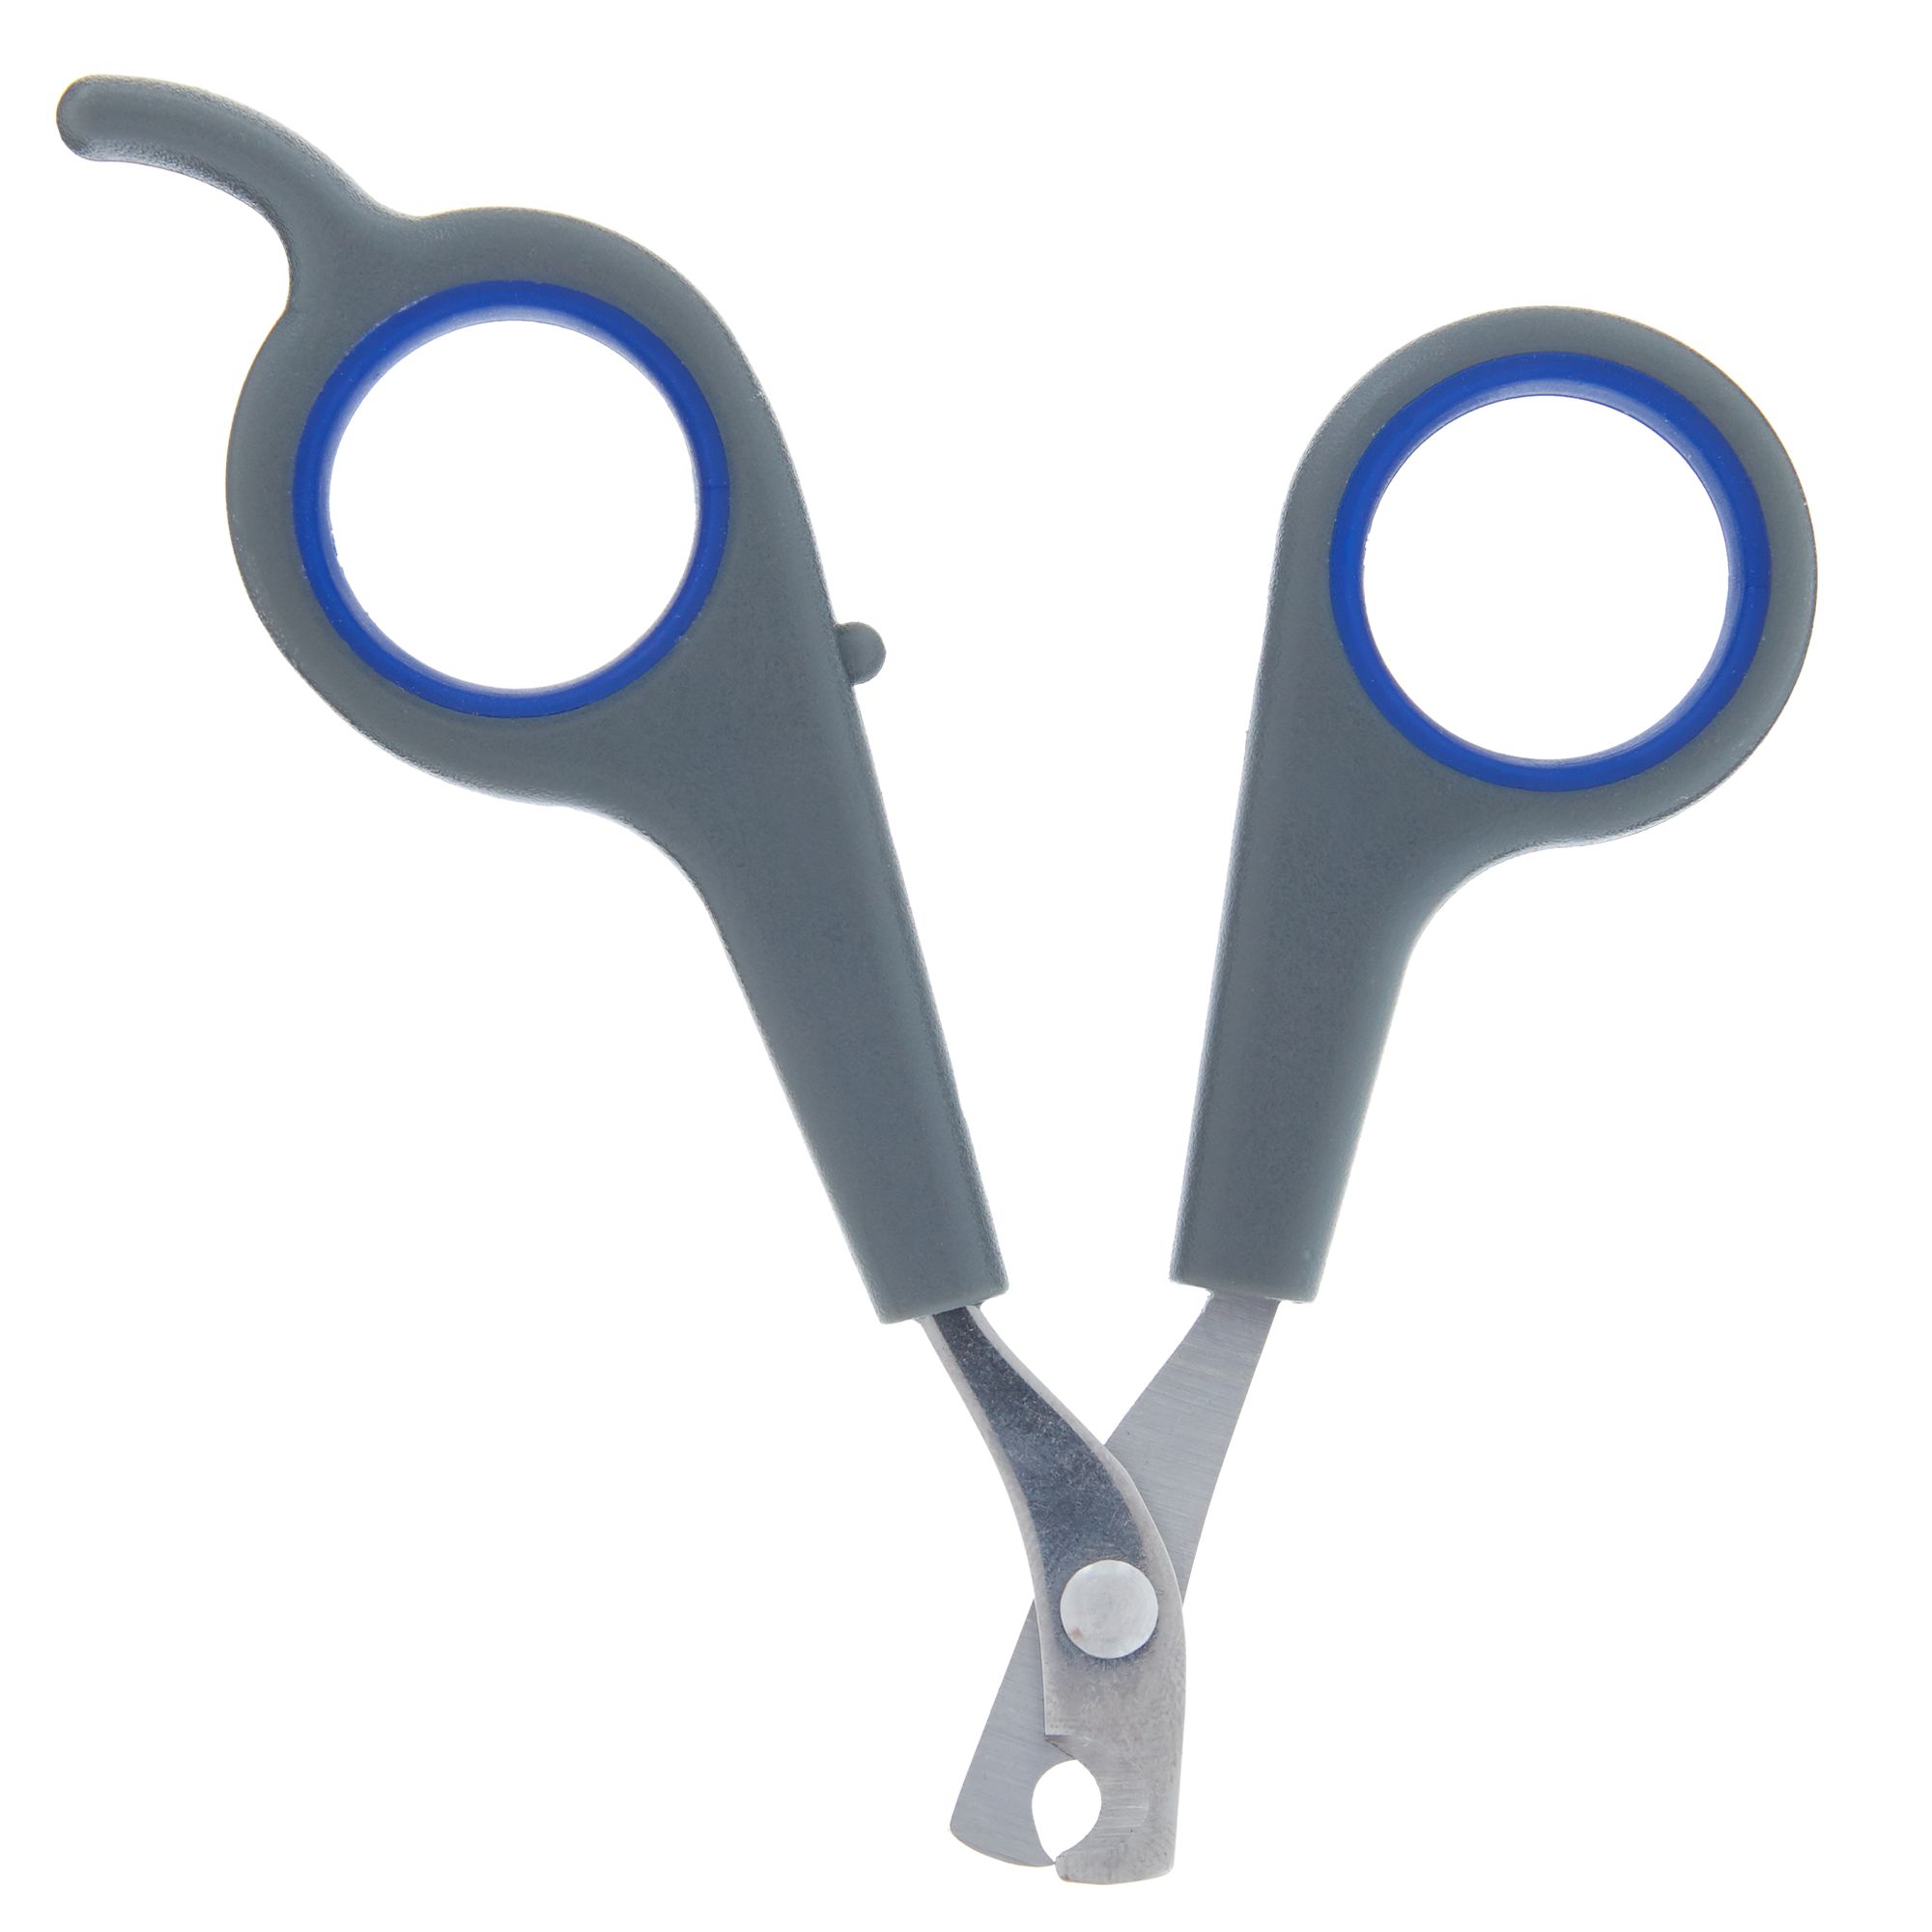 top paw small nail clipper